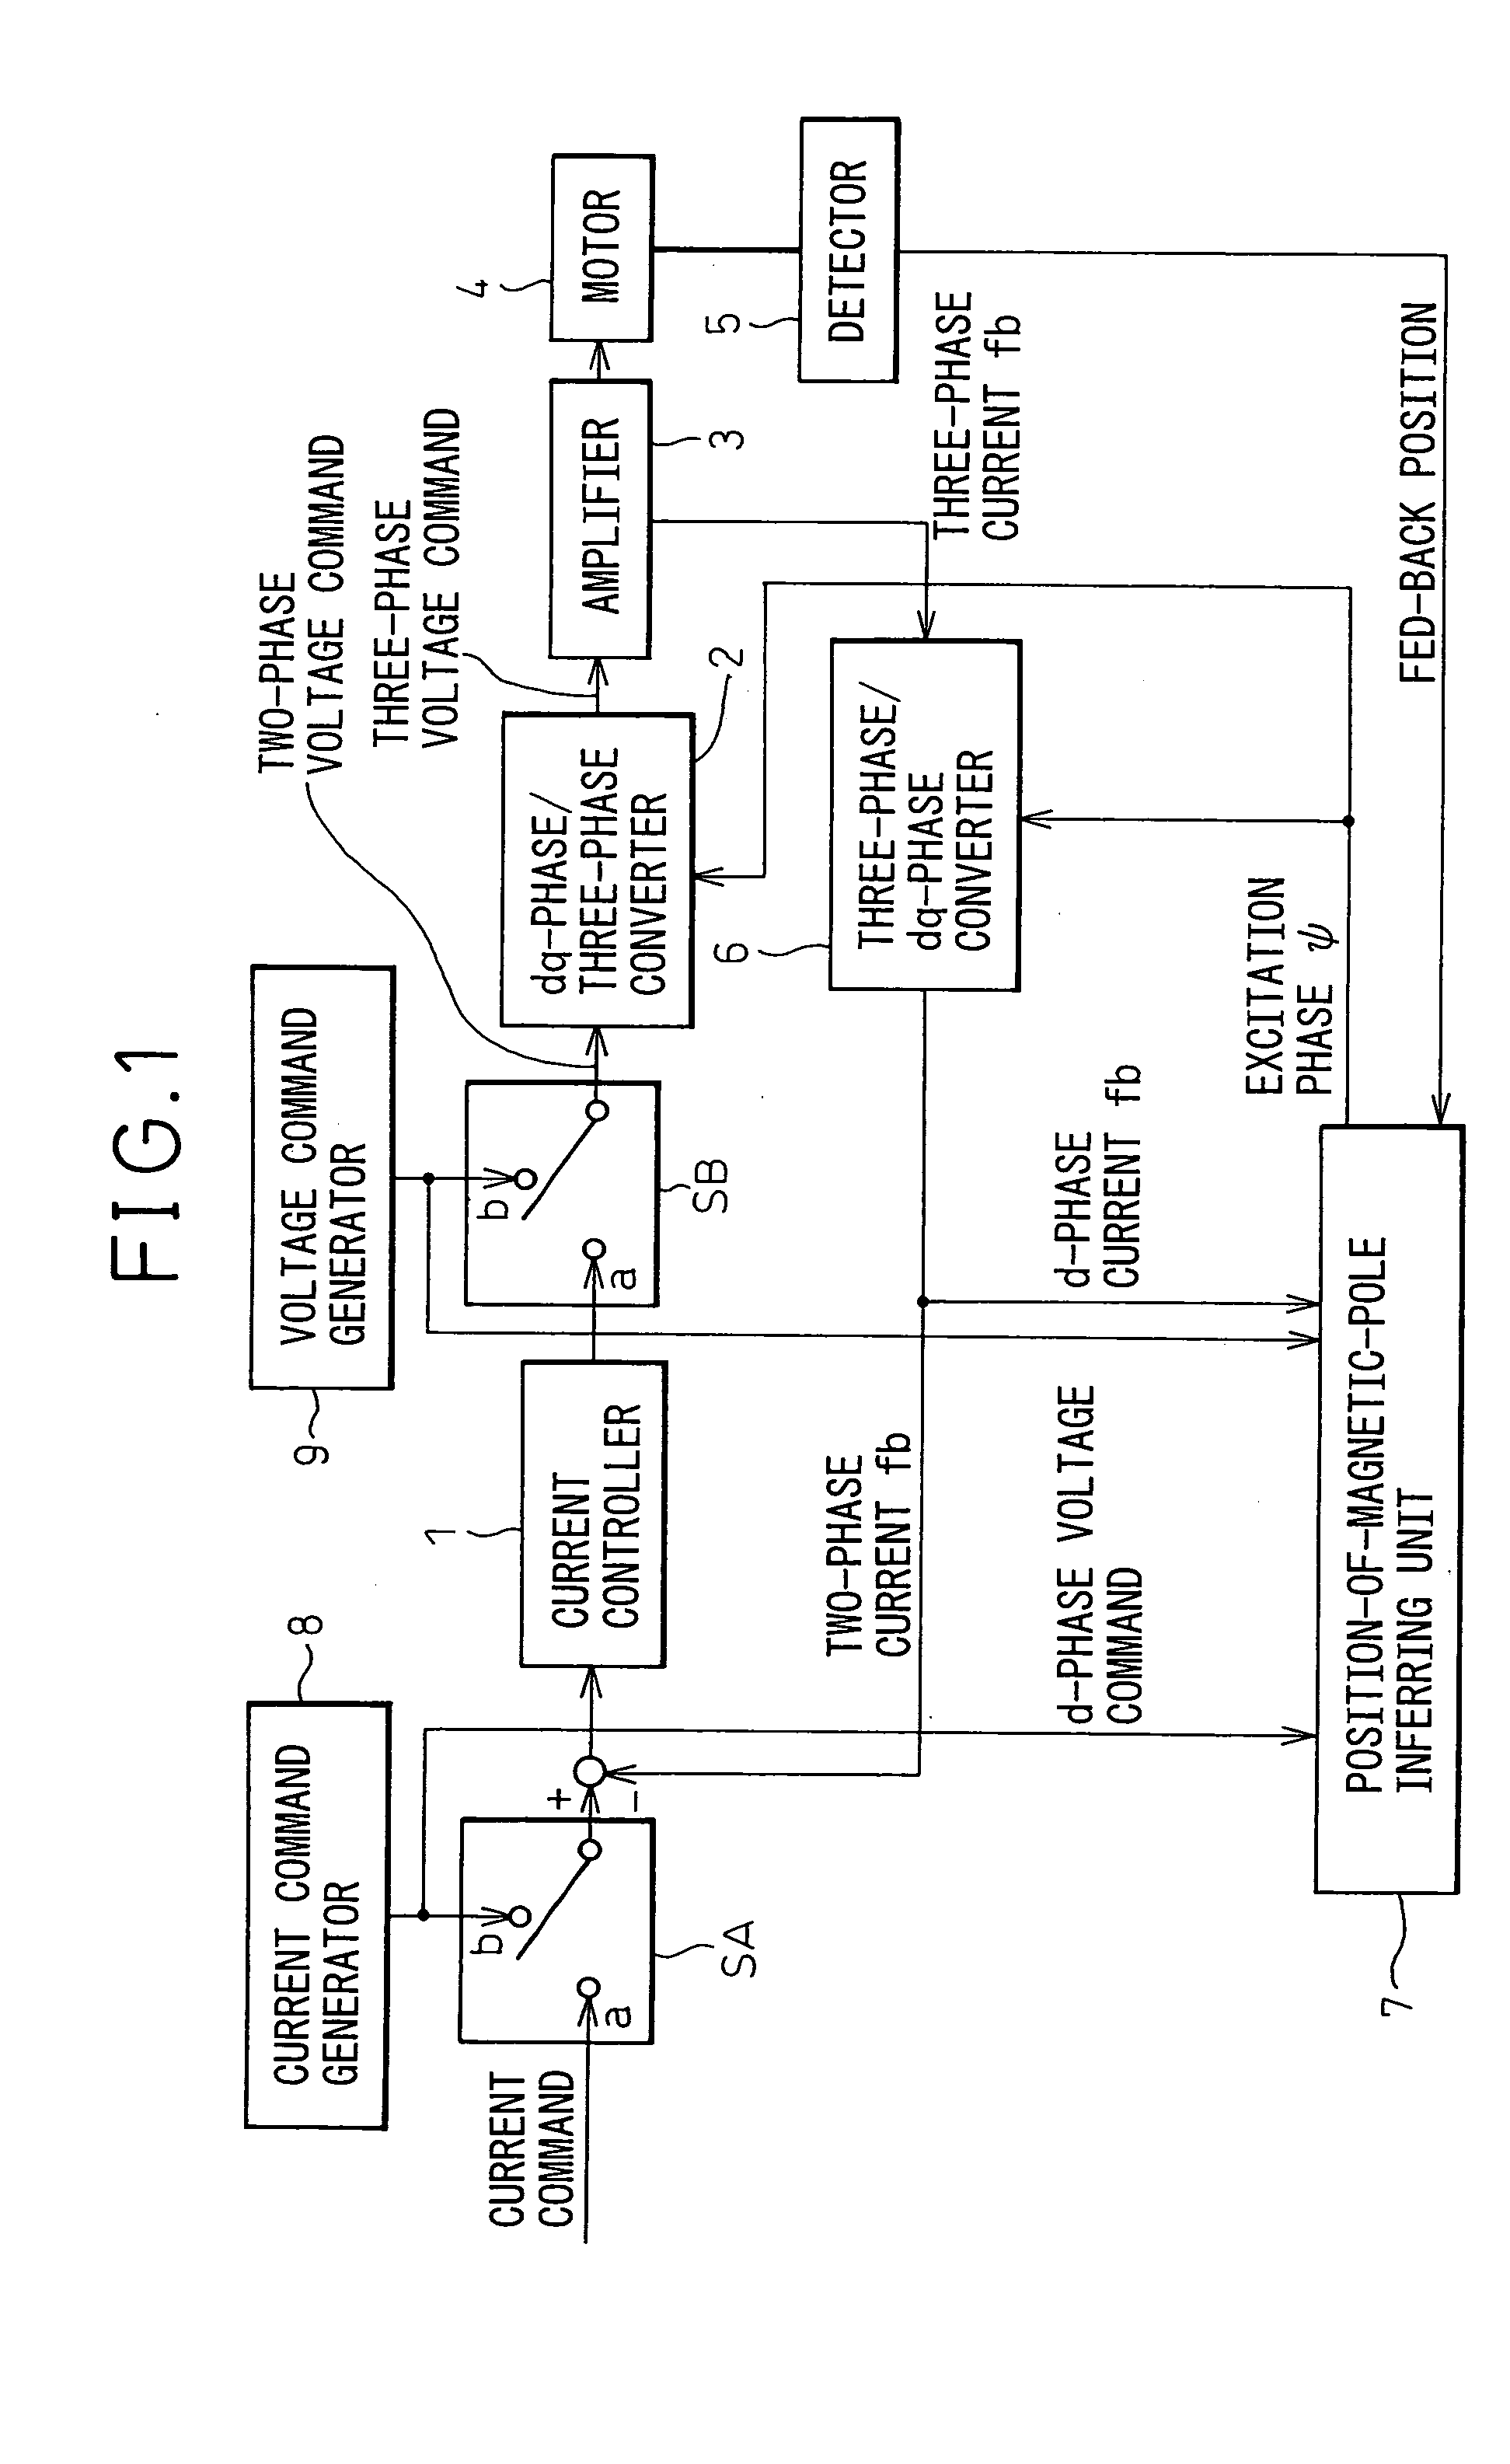 Position-of-magnetic-pole detecting device